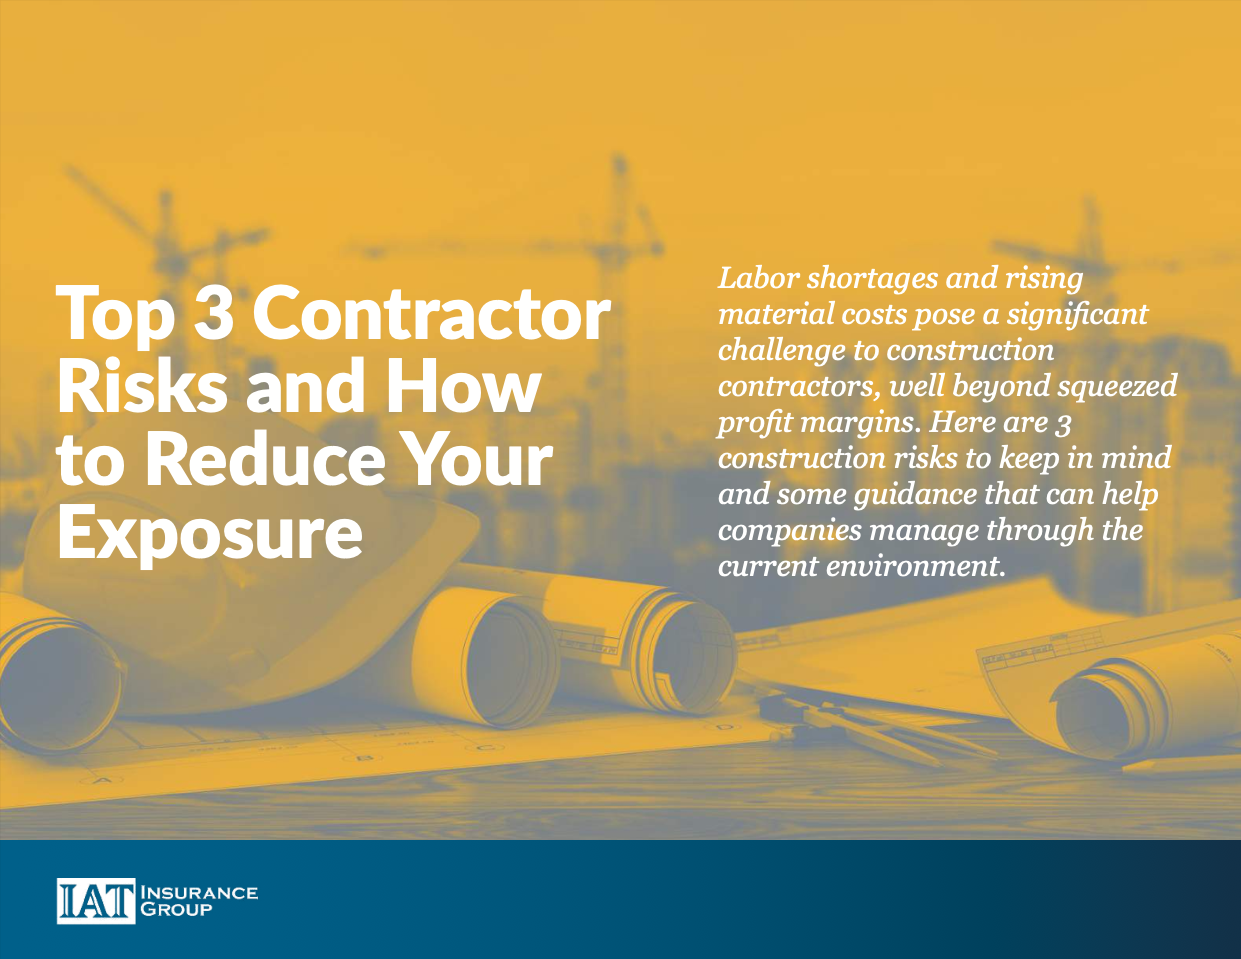 Top 3 Contractor Risks and How to Reduce Your Exposure